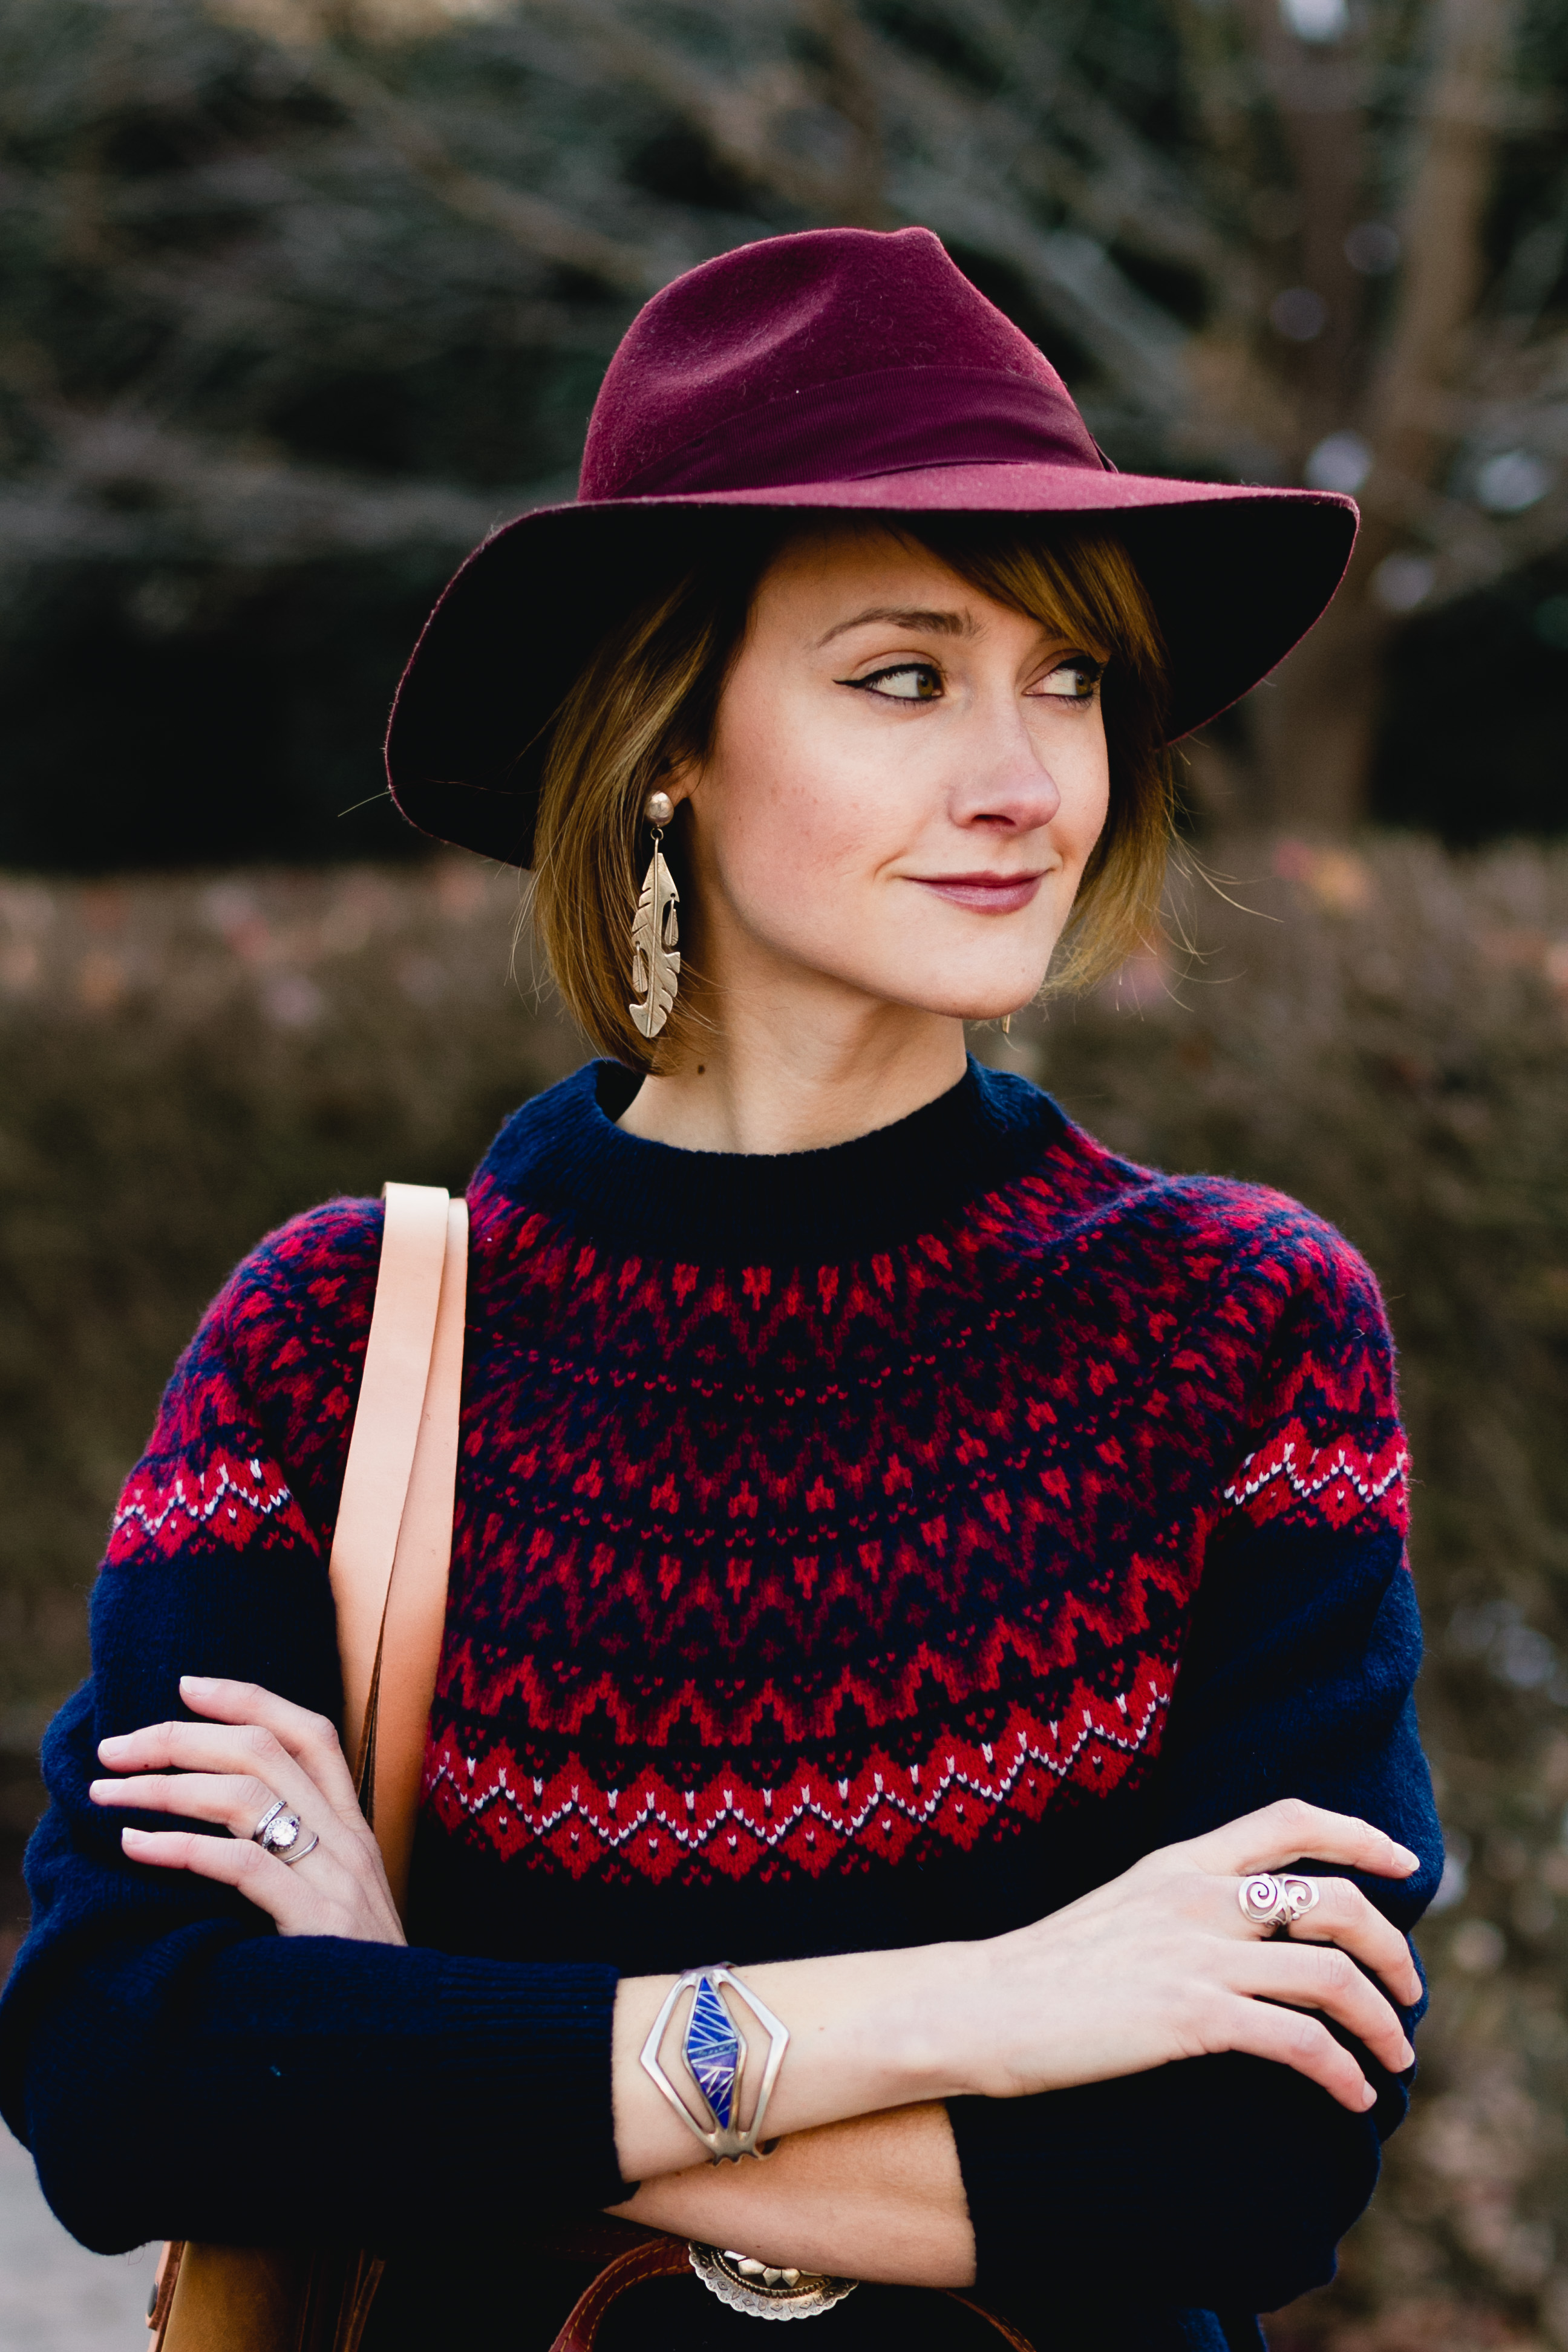 Woolovers fair isle dress and red fedora